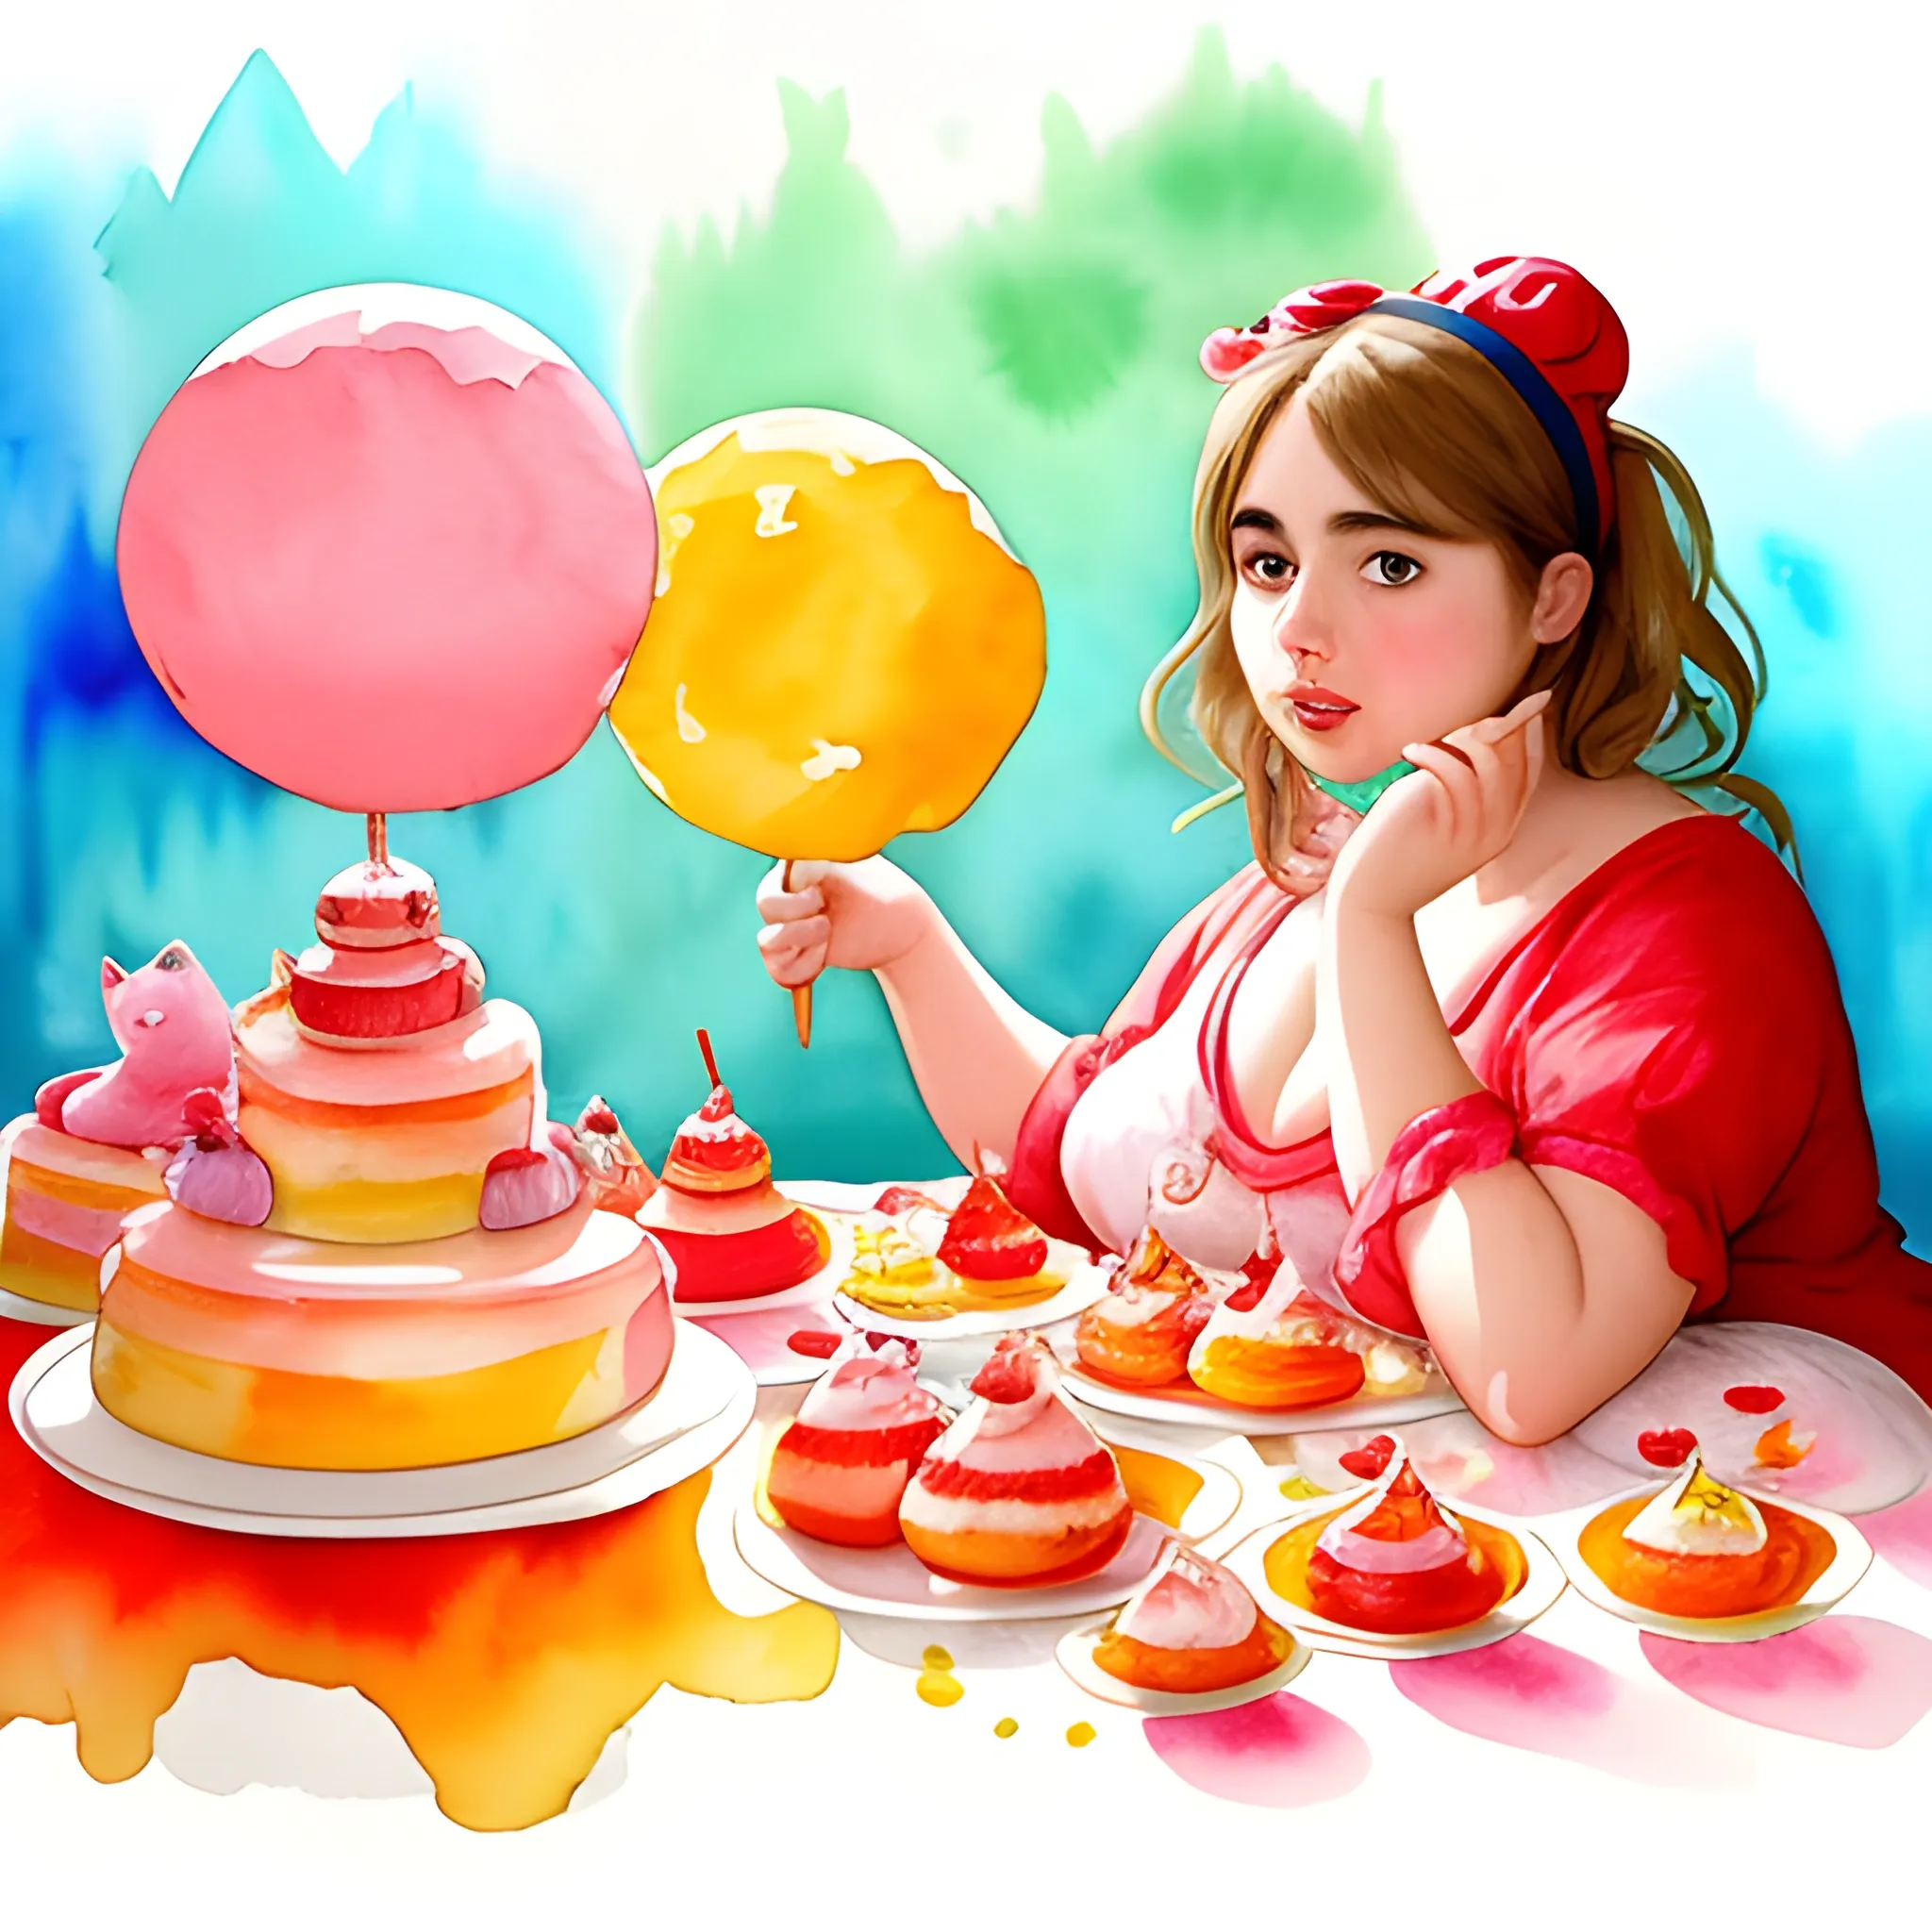 Illustrate a whimsical scene with Ana de Armas in a world of plump, colorful confectionery, surrounded by chubby, delightful creatures. Utilize watercolor techniques reminiscent of the renowned painter J.M.W. Turner, with the predominant use of the color red to make the sweets and creatures burst with flavor and charm.